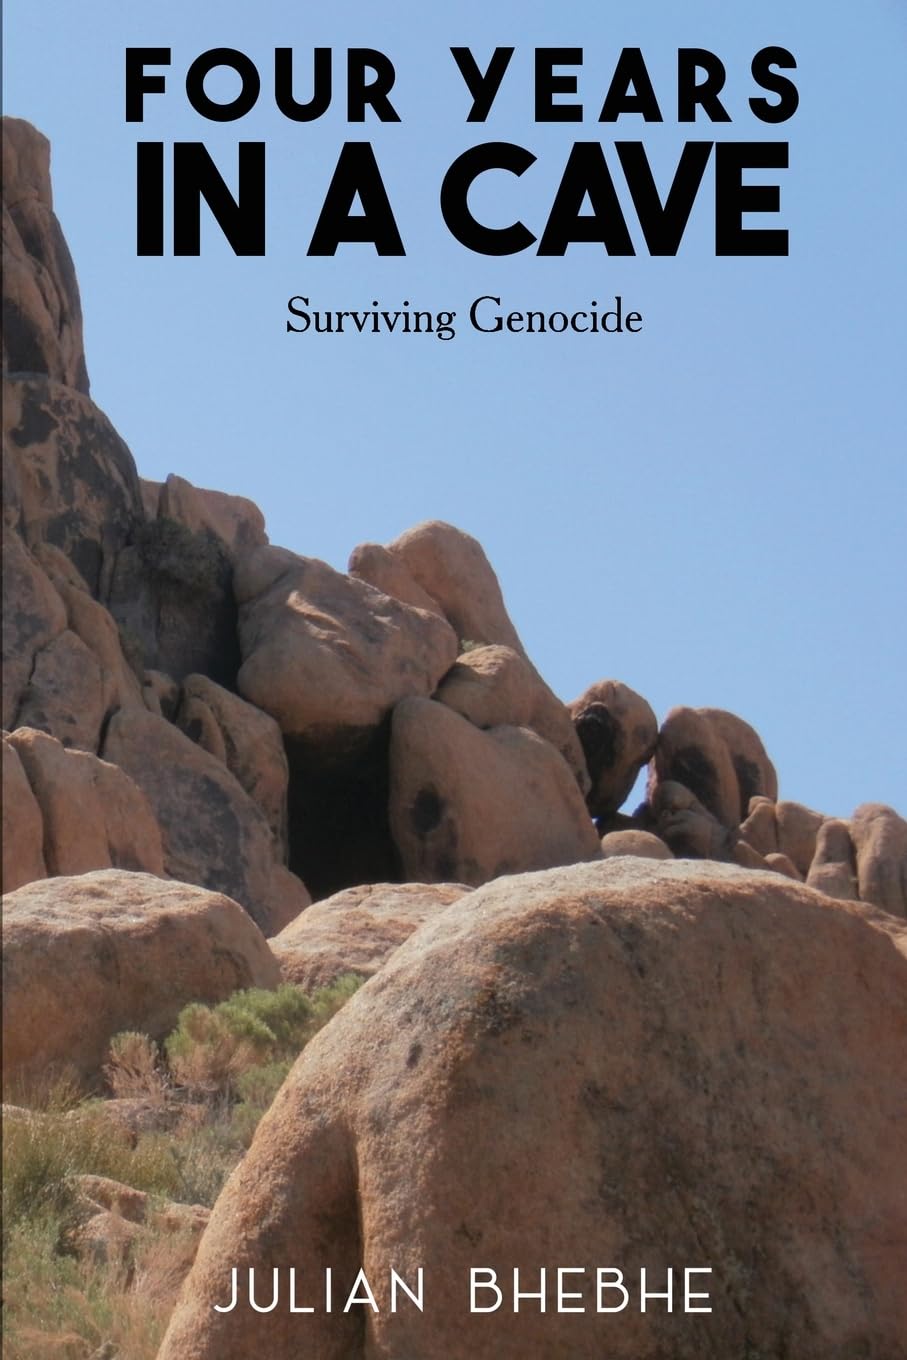 "Four Years in a Cave" by Julian Bhebhe: A Tale of Survival, Resilience, and Redemption